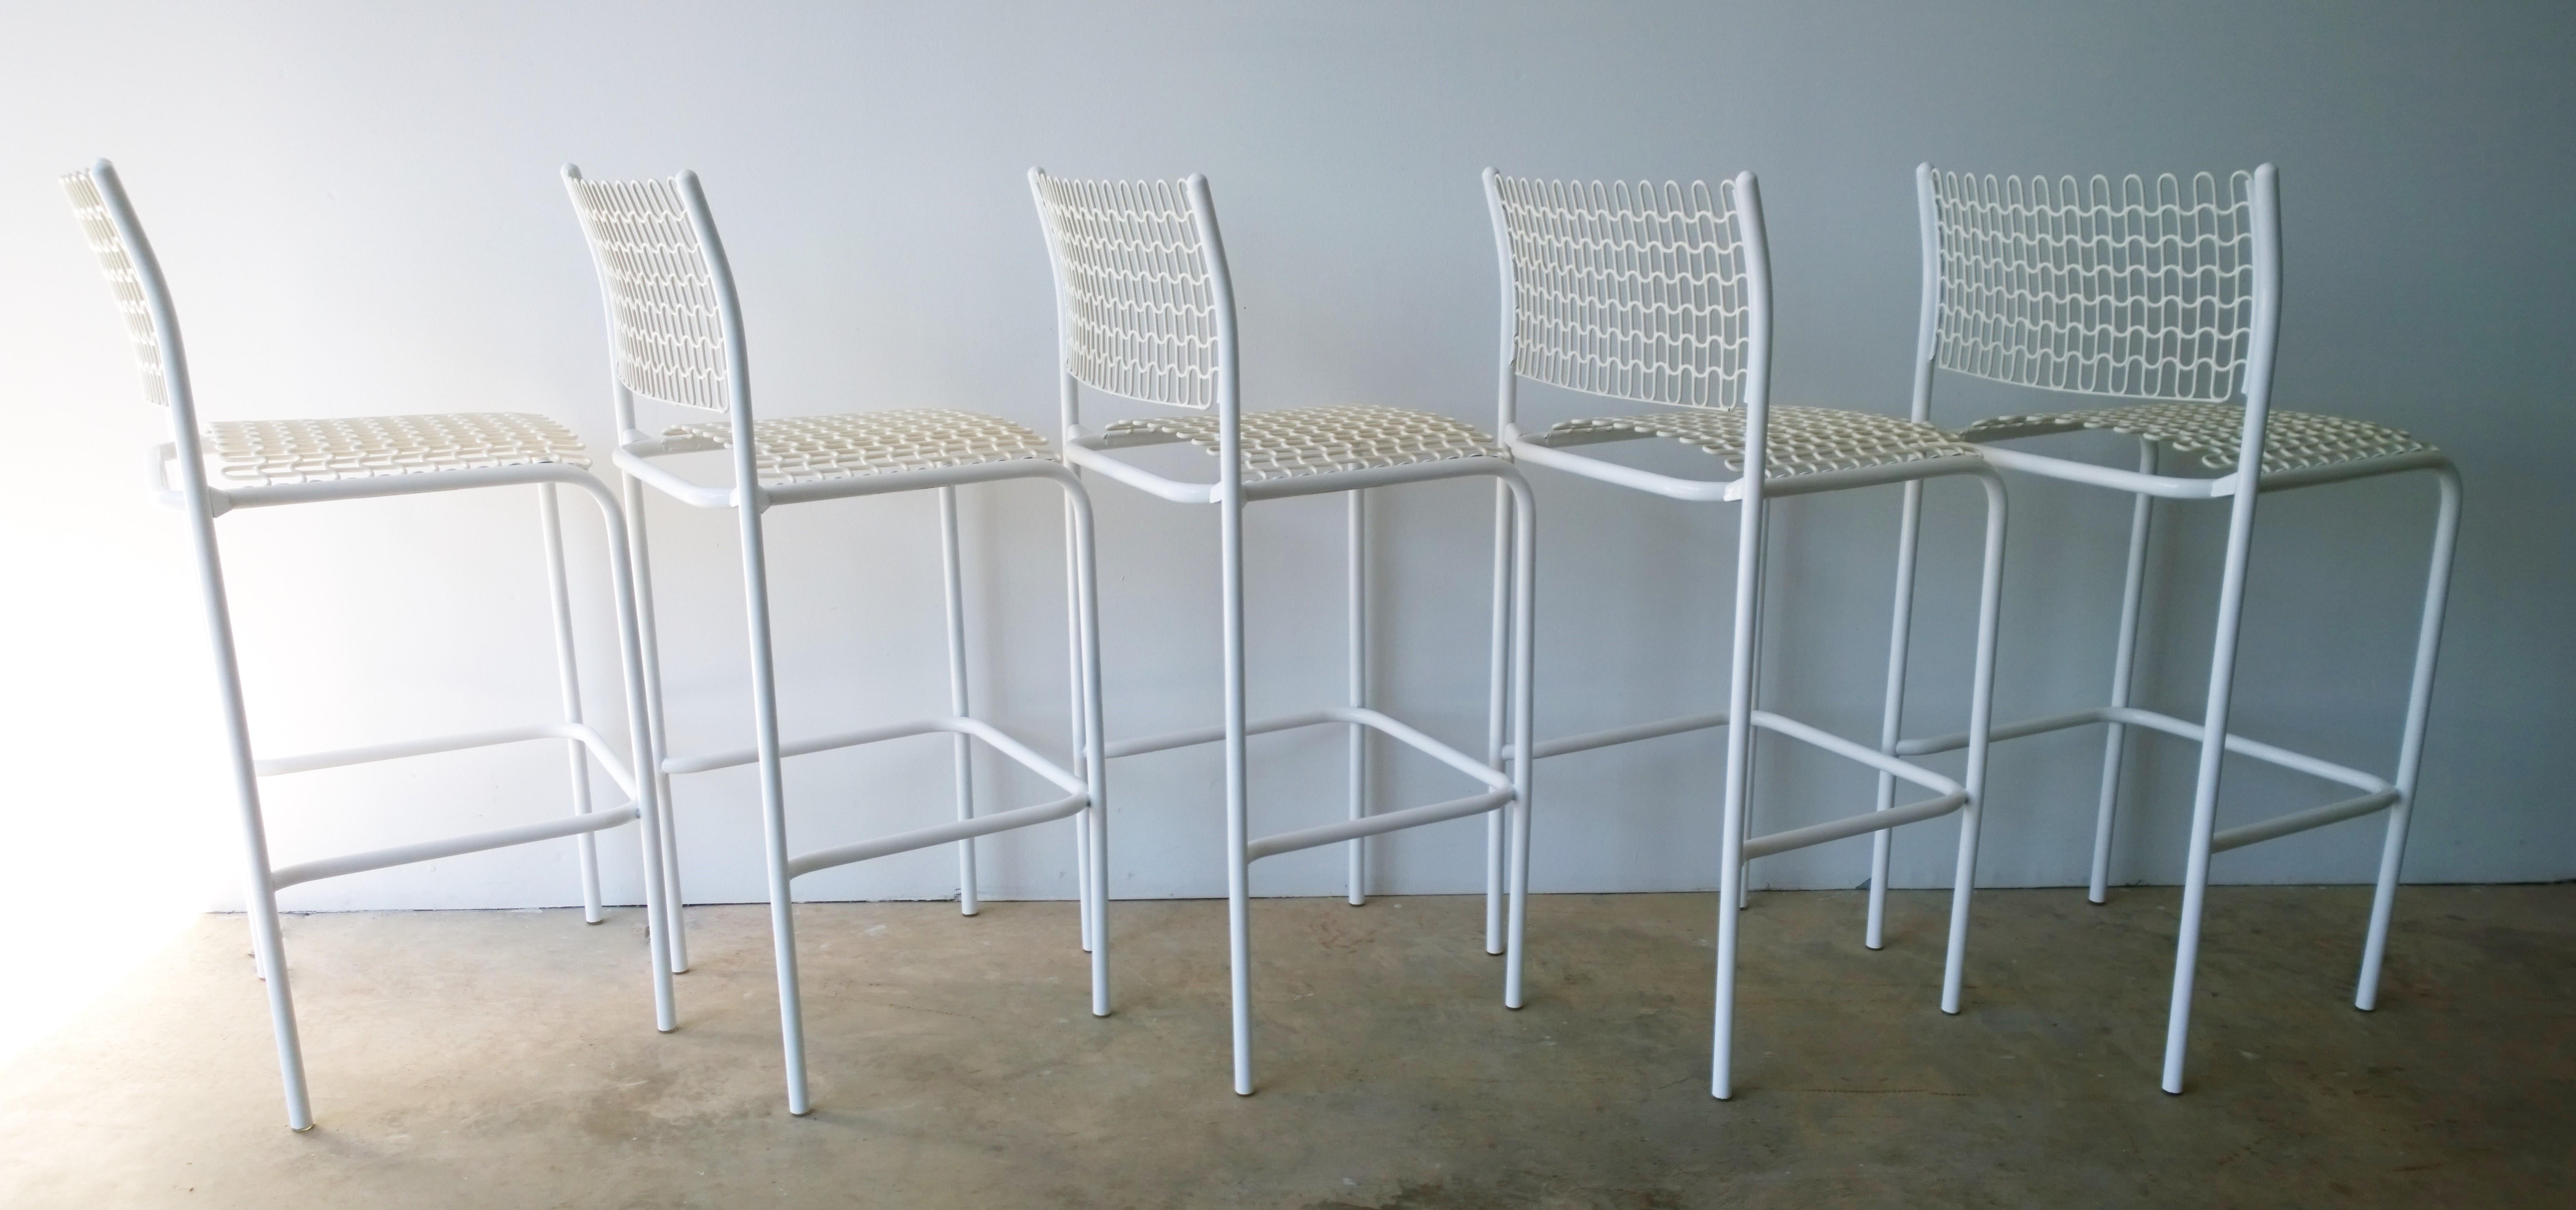 Set of 5 David Rowland for Thonet Sof-Tek White Patio Indoor/ Outdoor Bar Stools In Good Condition For Sale In Houston, TX